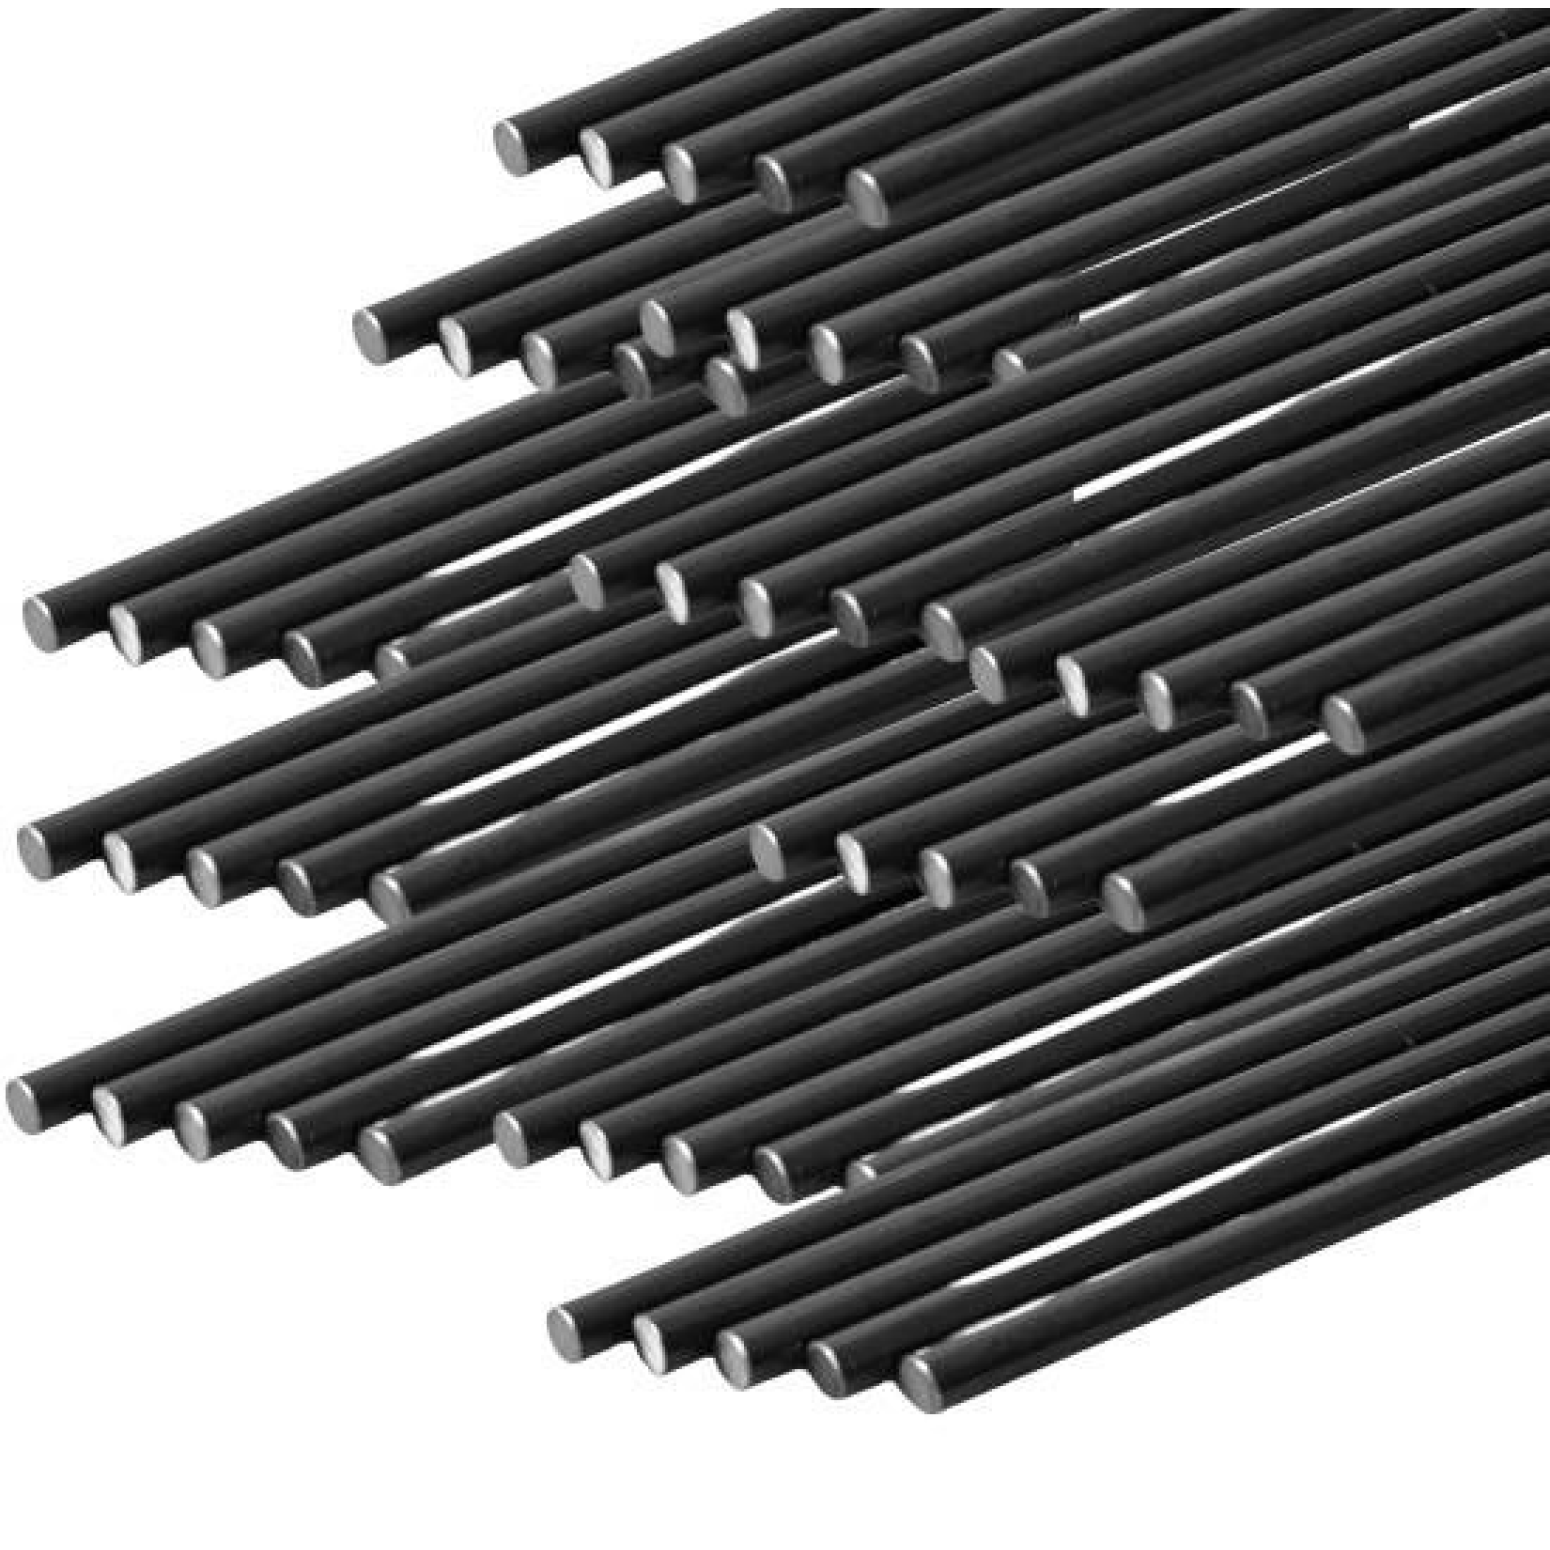 Round Steel Bars TISI Standards assorted brands SR24 RB9 length 10m 4.99kg per pc price for 7 tons and up